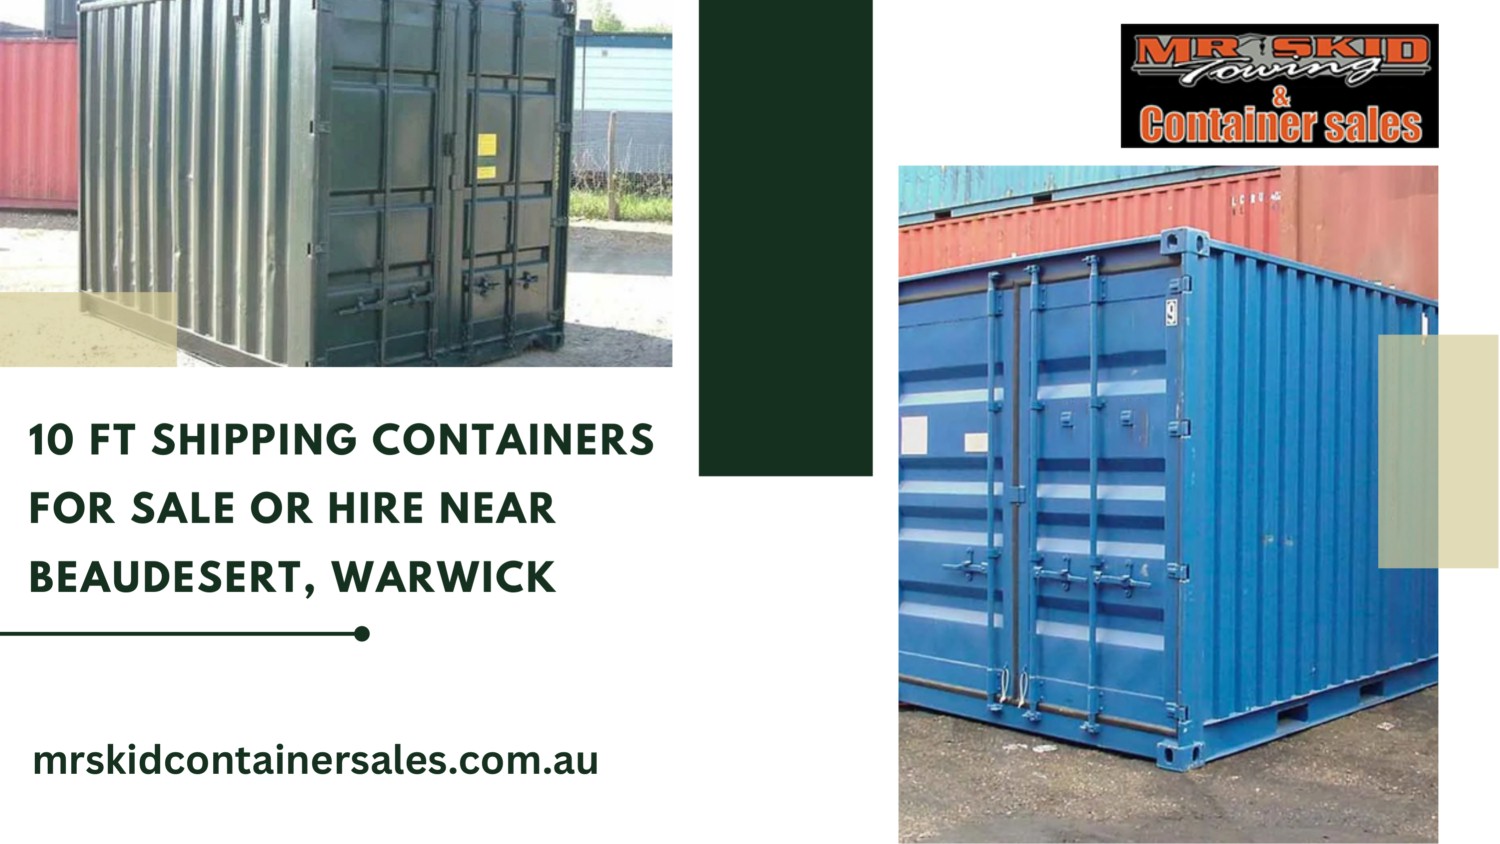 10 ft Shipping Containers For Sale Or Hire Near Beaudesert, Warwick